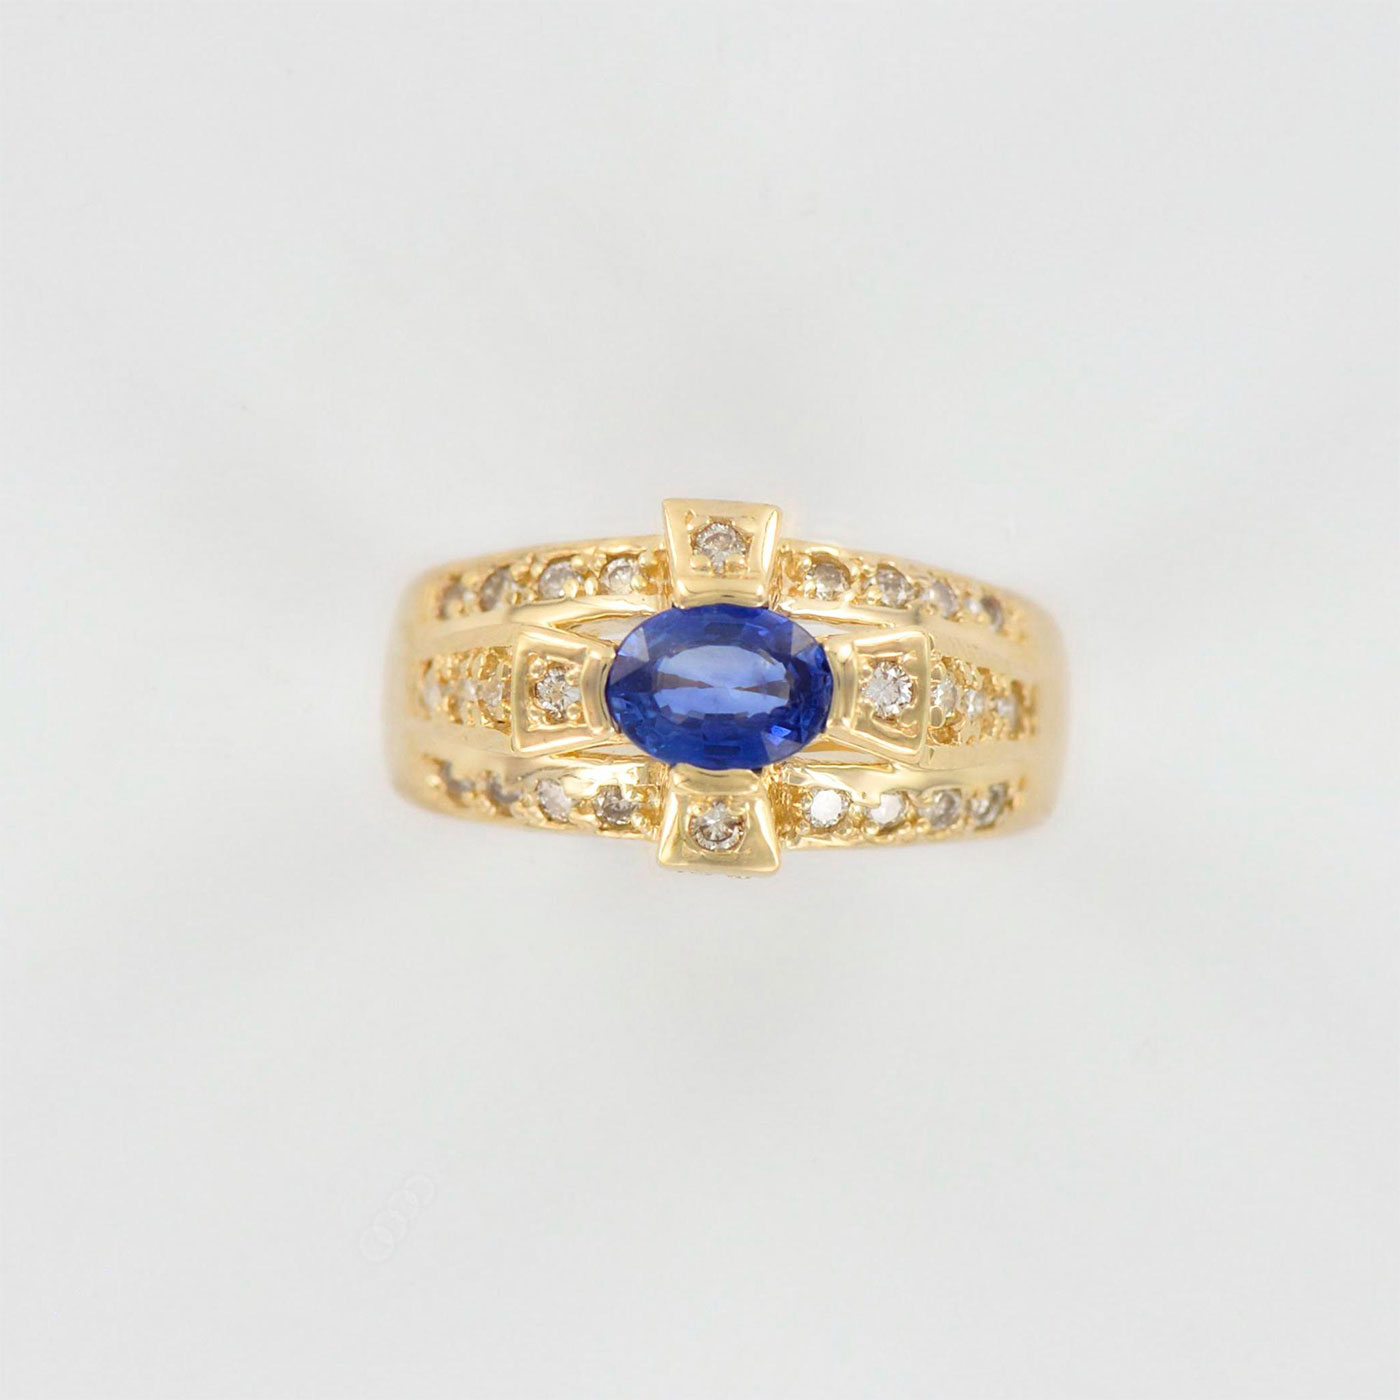 14K Yellow Gold Diamonds and Blue Sapphire Statement Ring - Image 2 of 5